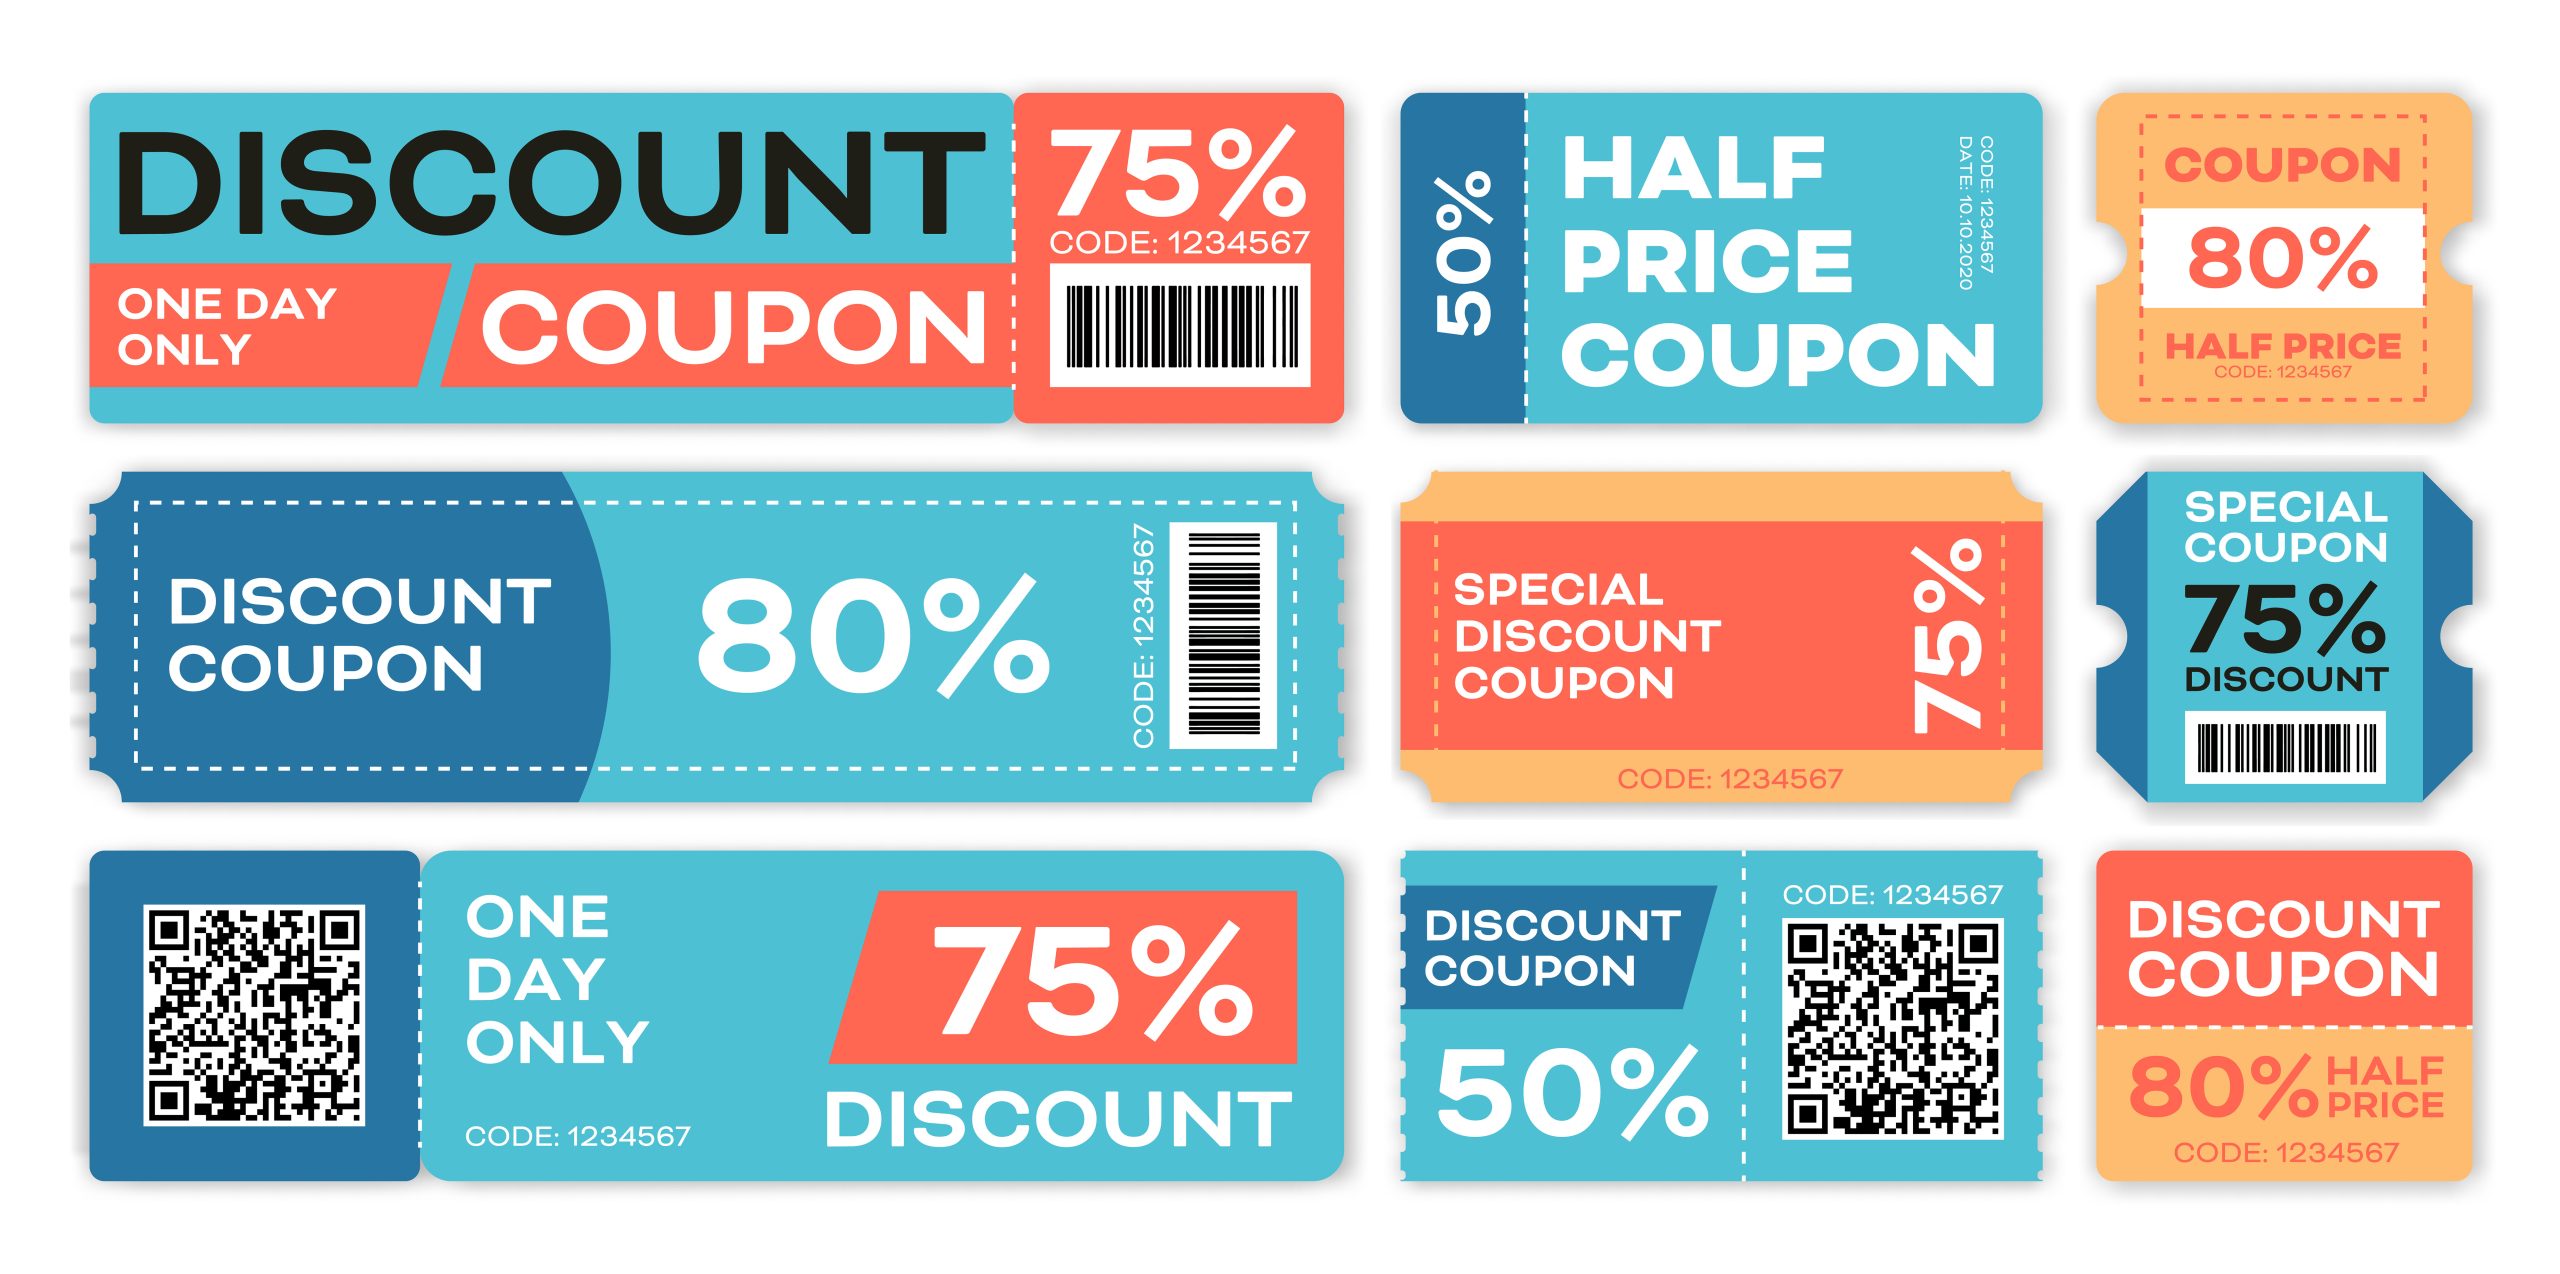 Exclusive coupons